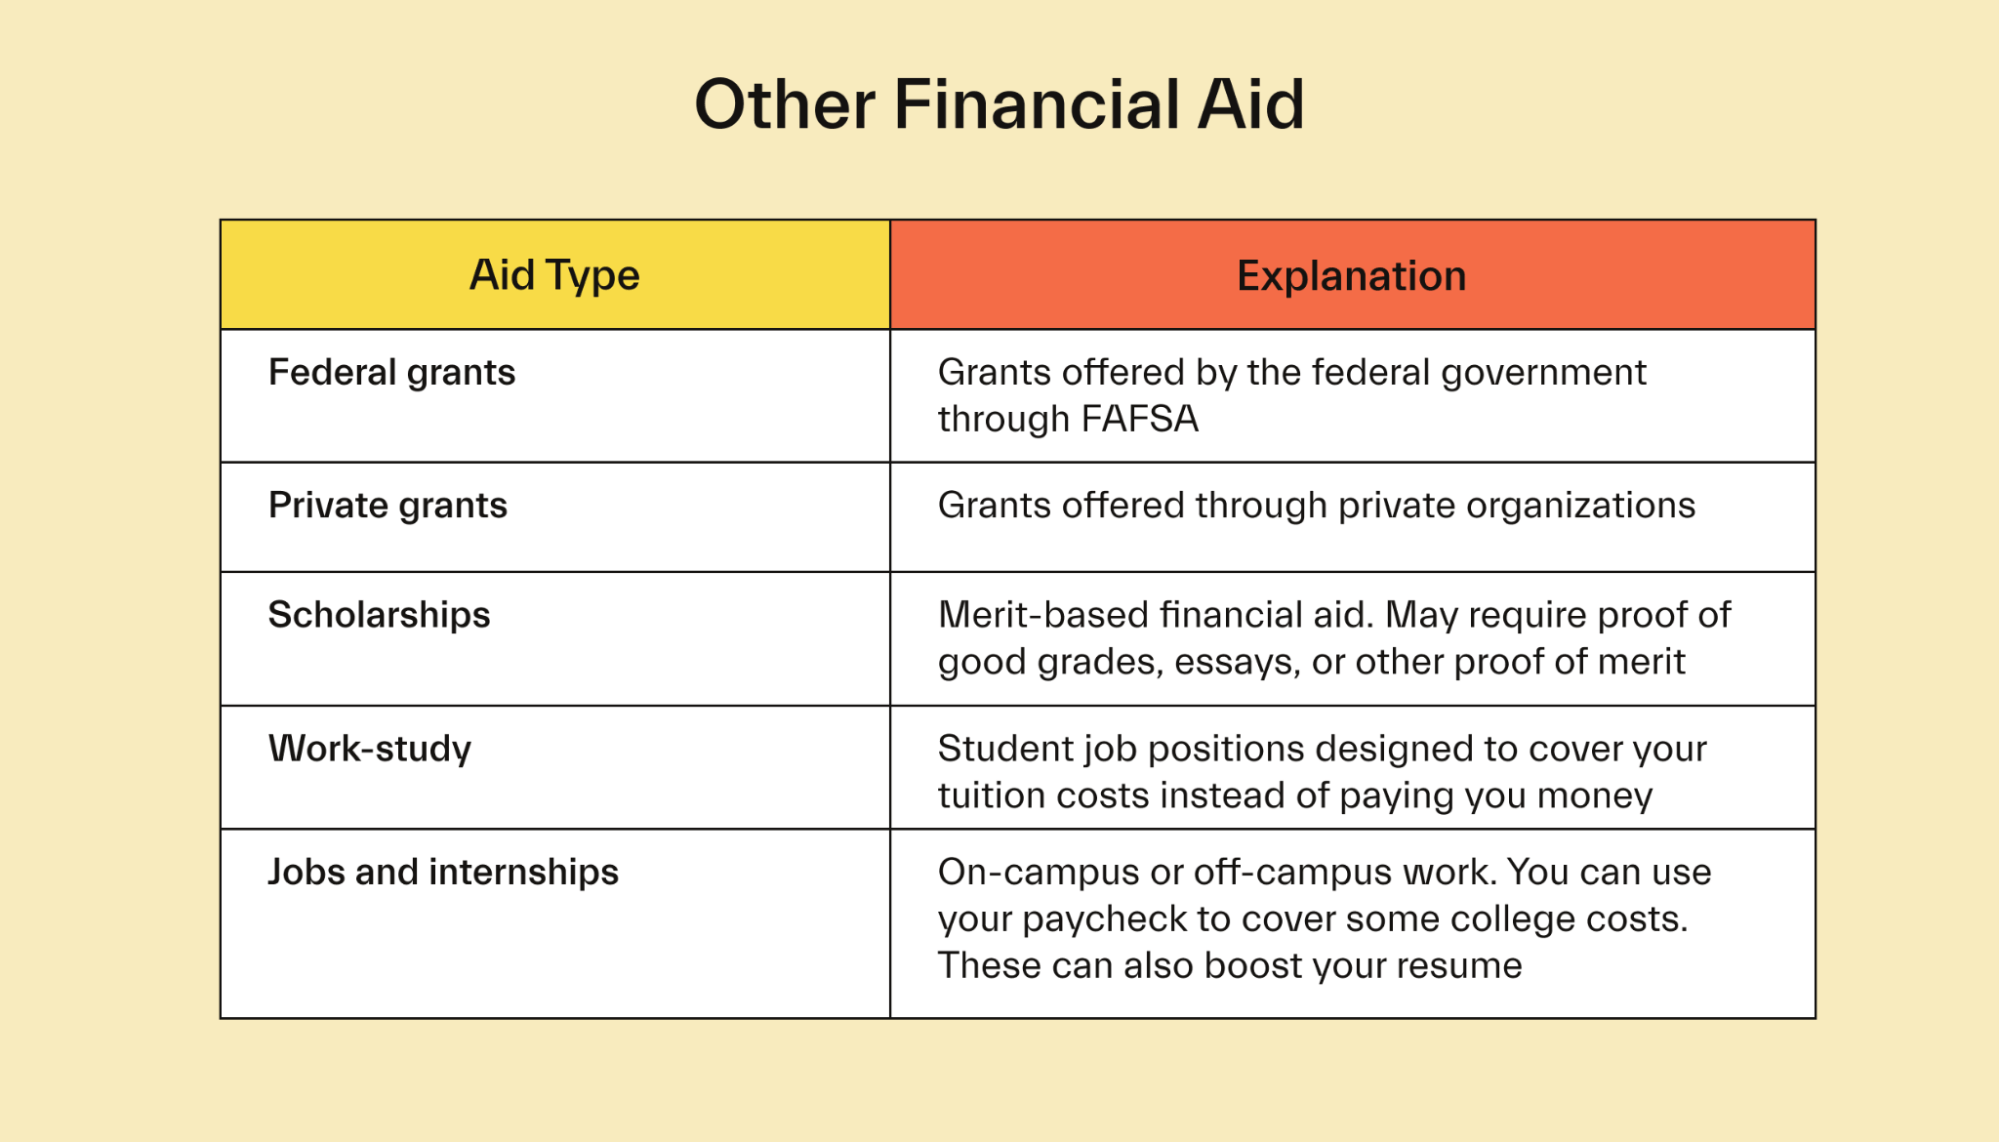 Other Financial Aid